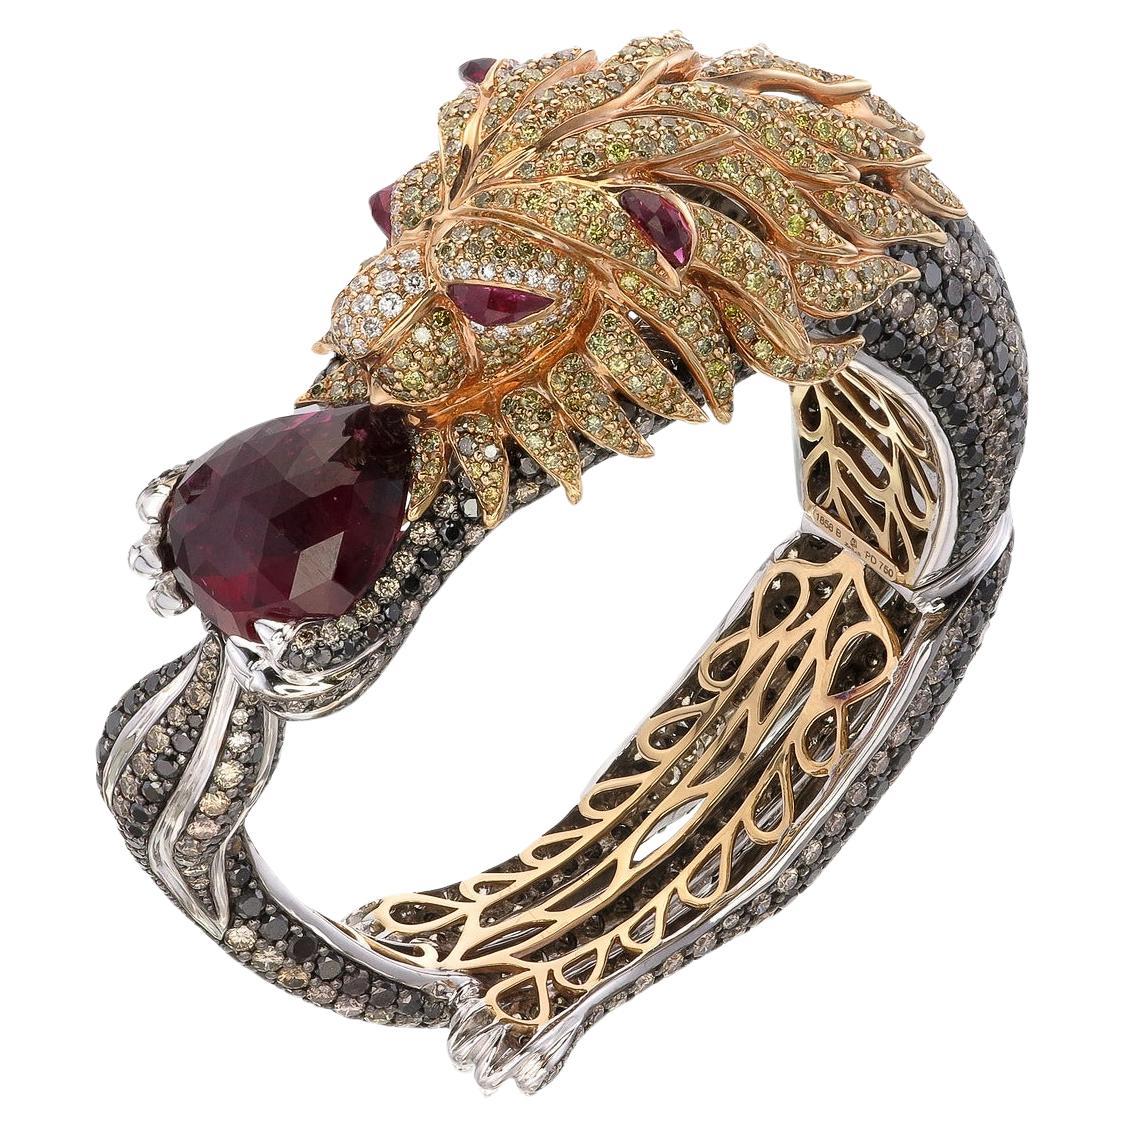 Zorab Creation’s 19.66-Ct Rubellite Stout-hearted Lion Bangle  For Sale